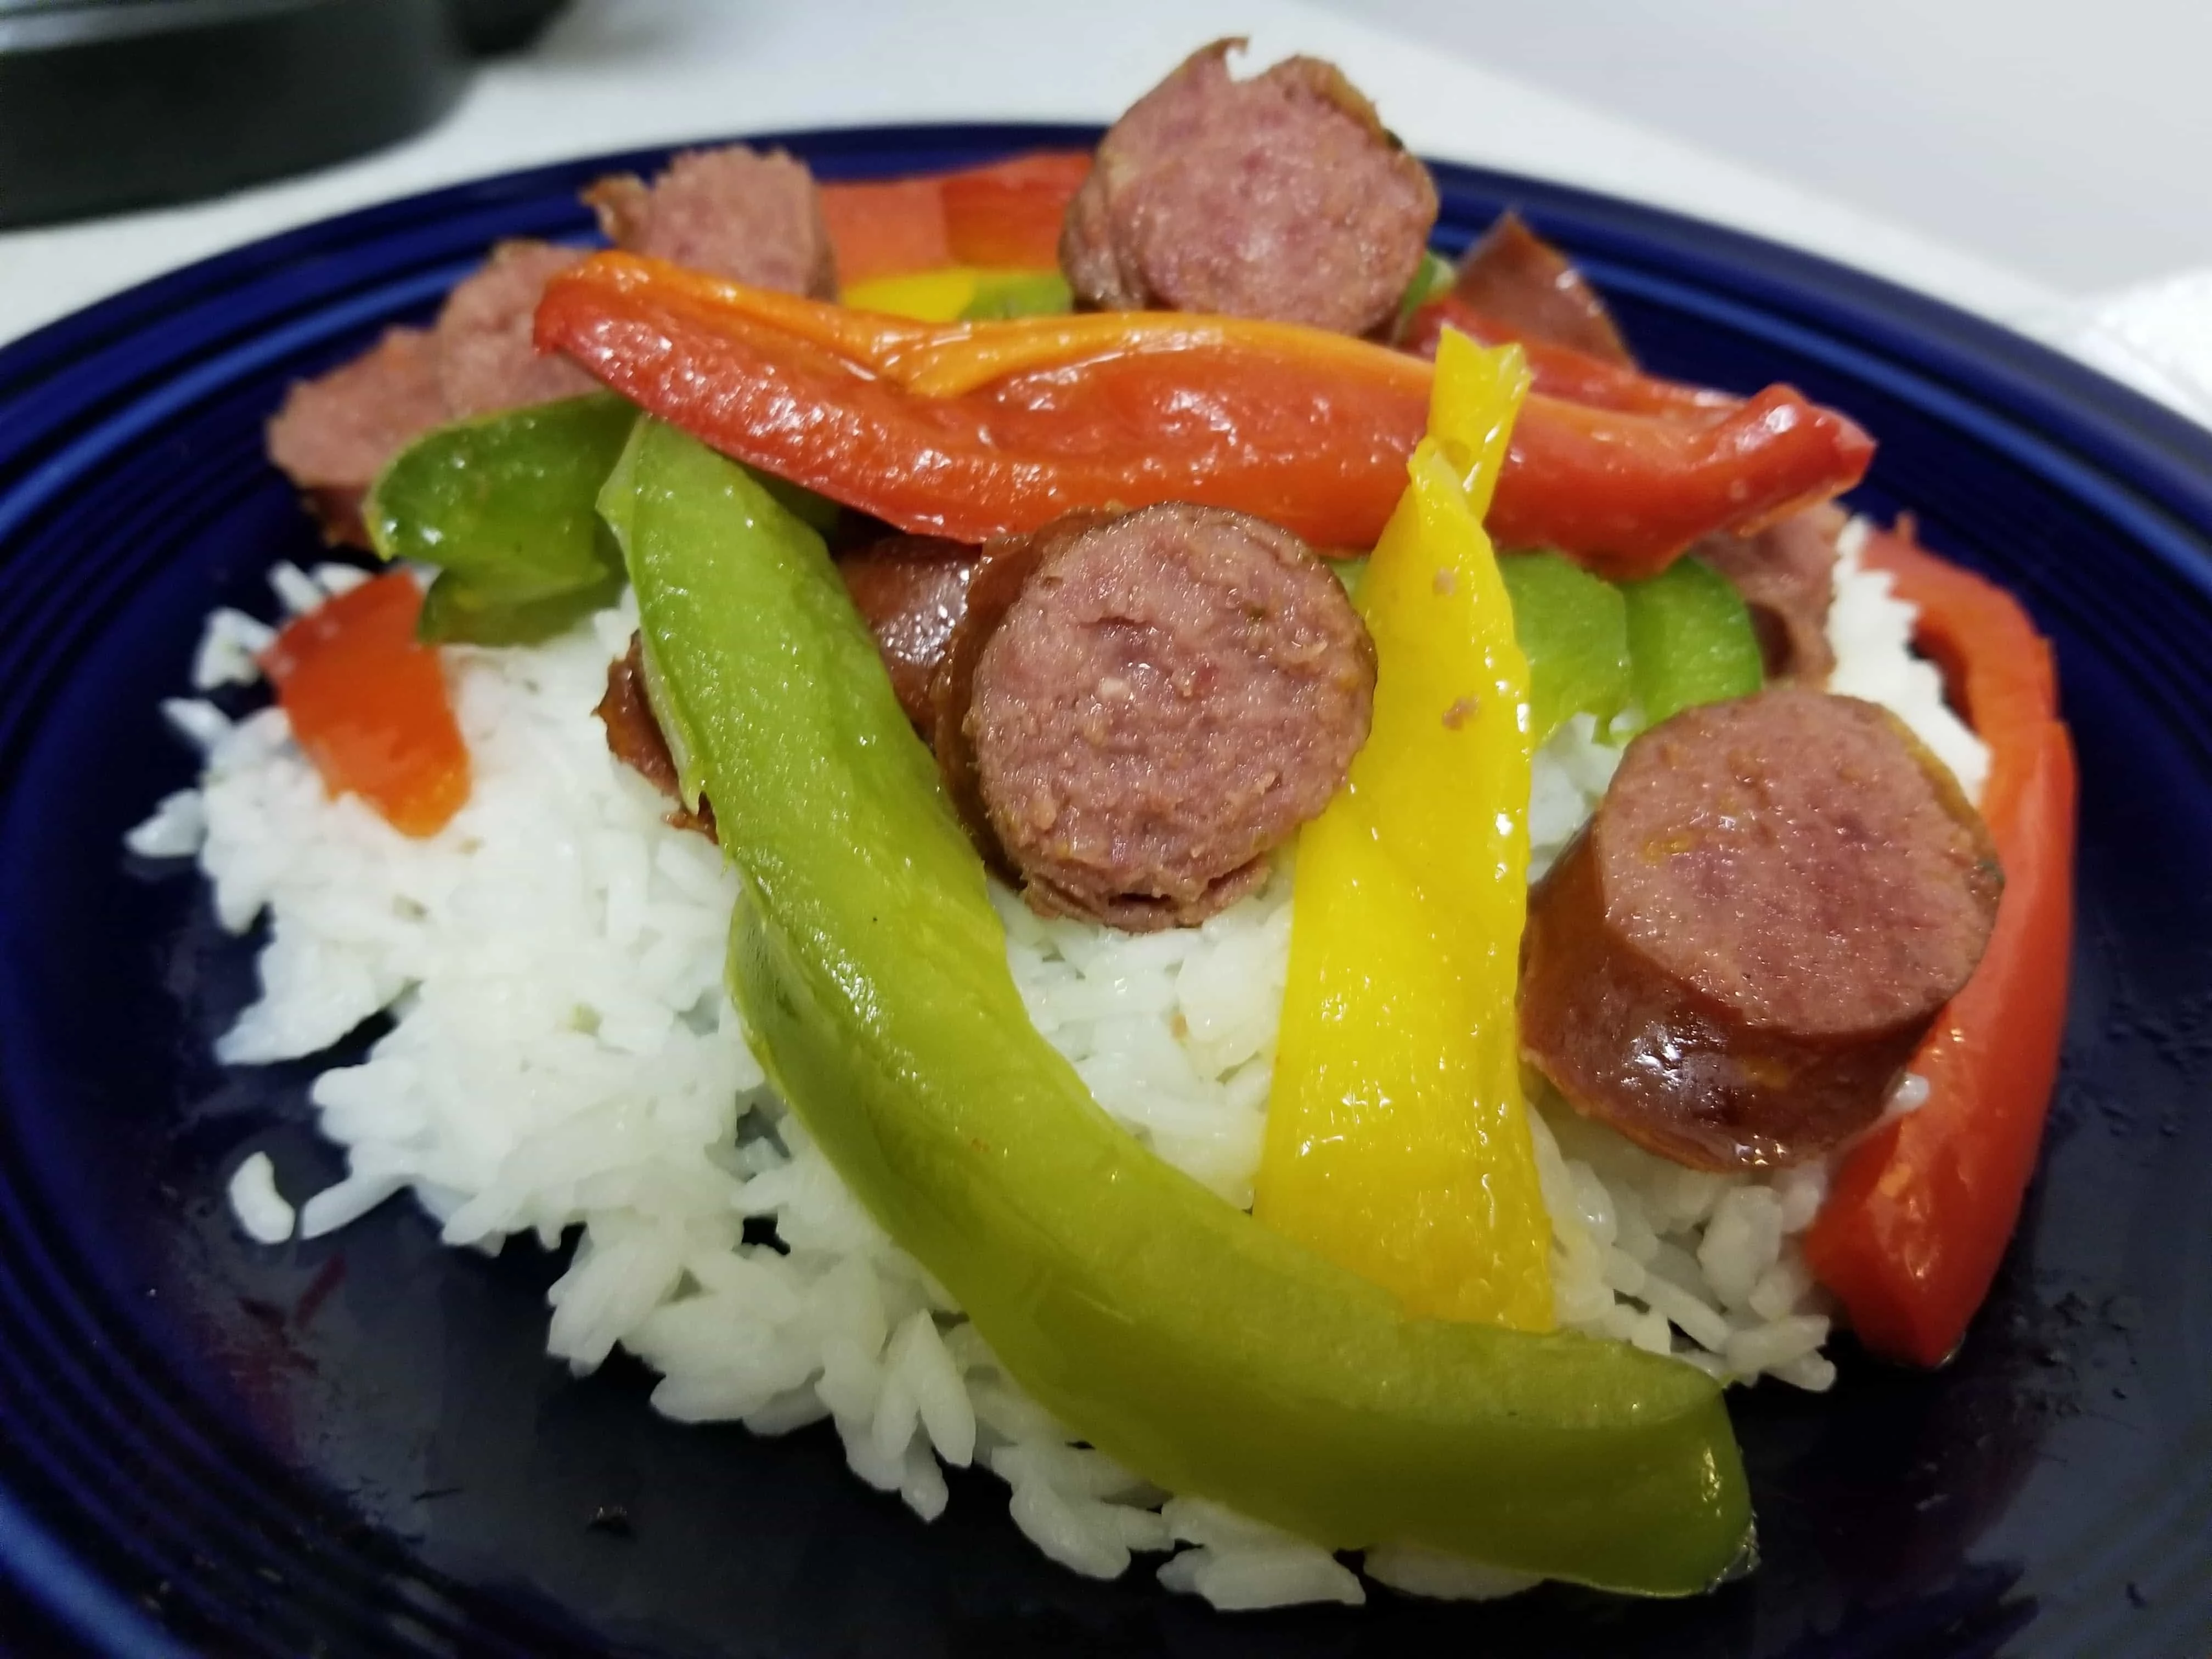 30 Quick and Easy Dinners - 30 Smoked Sausage and Peppers